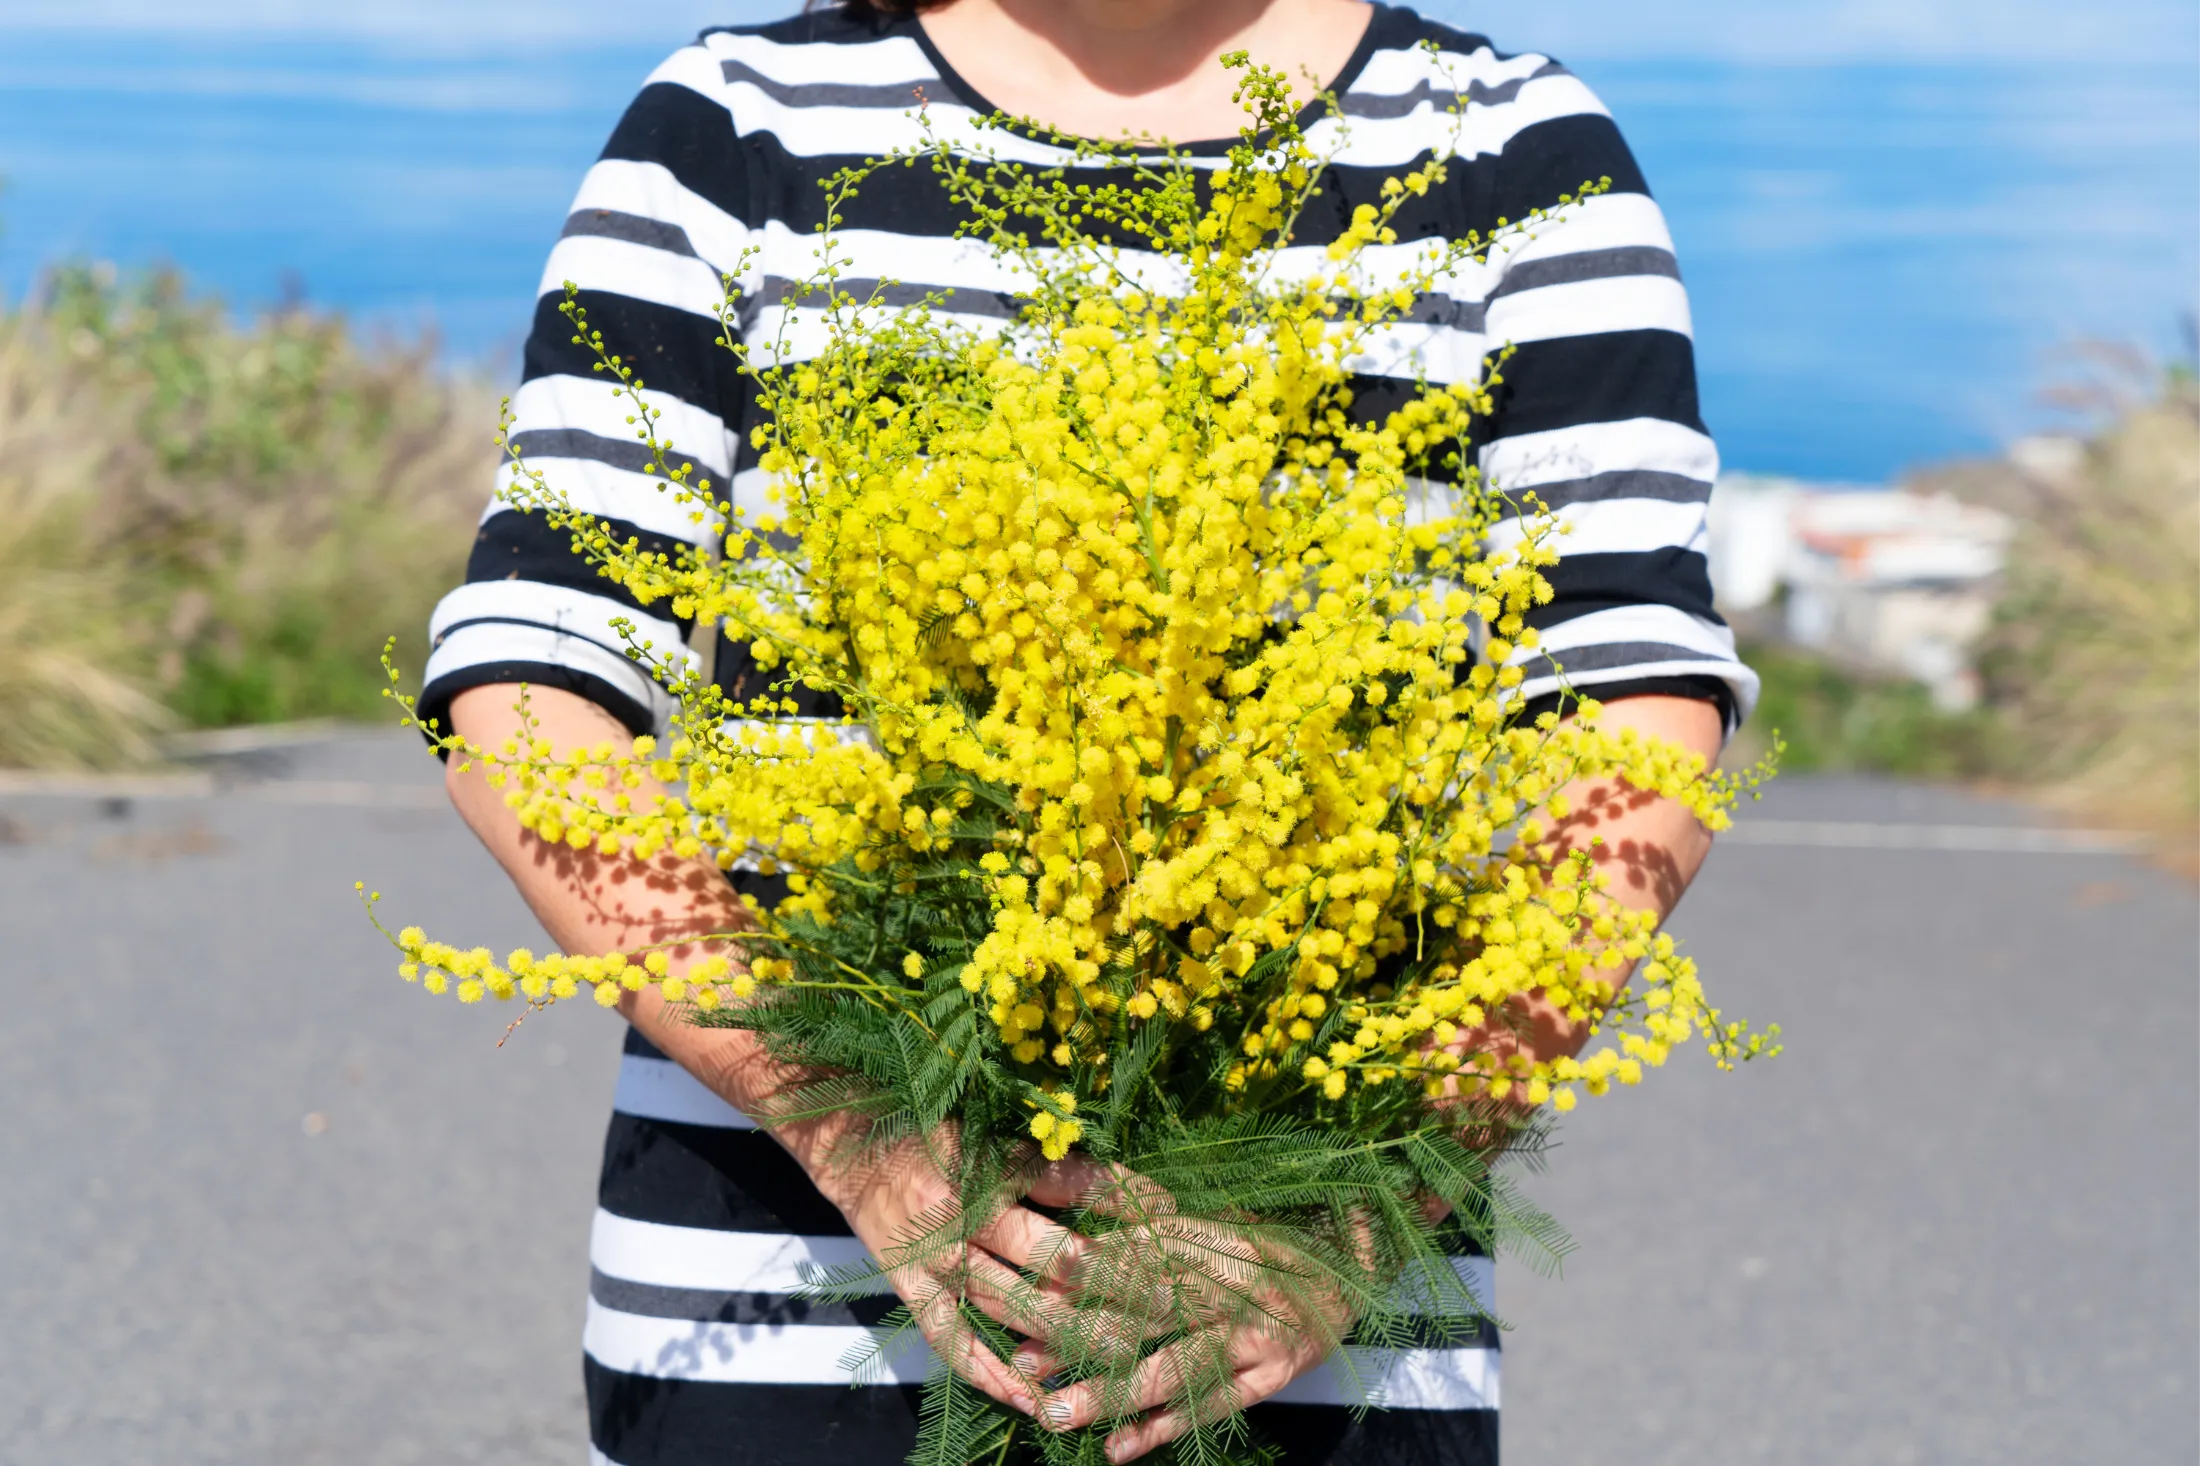 Woman holding a bouquet of Mimosa flowers.